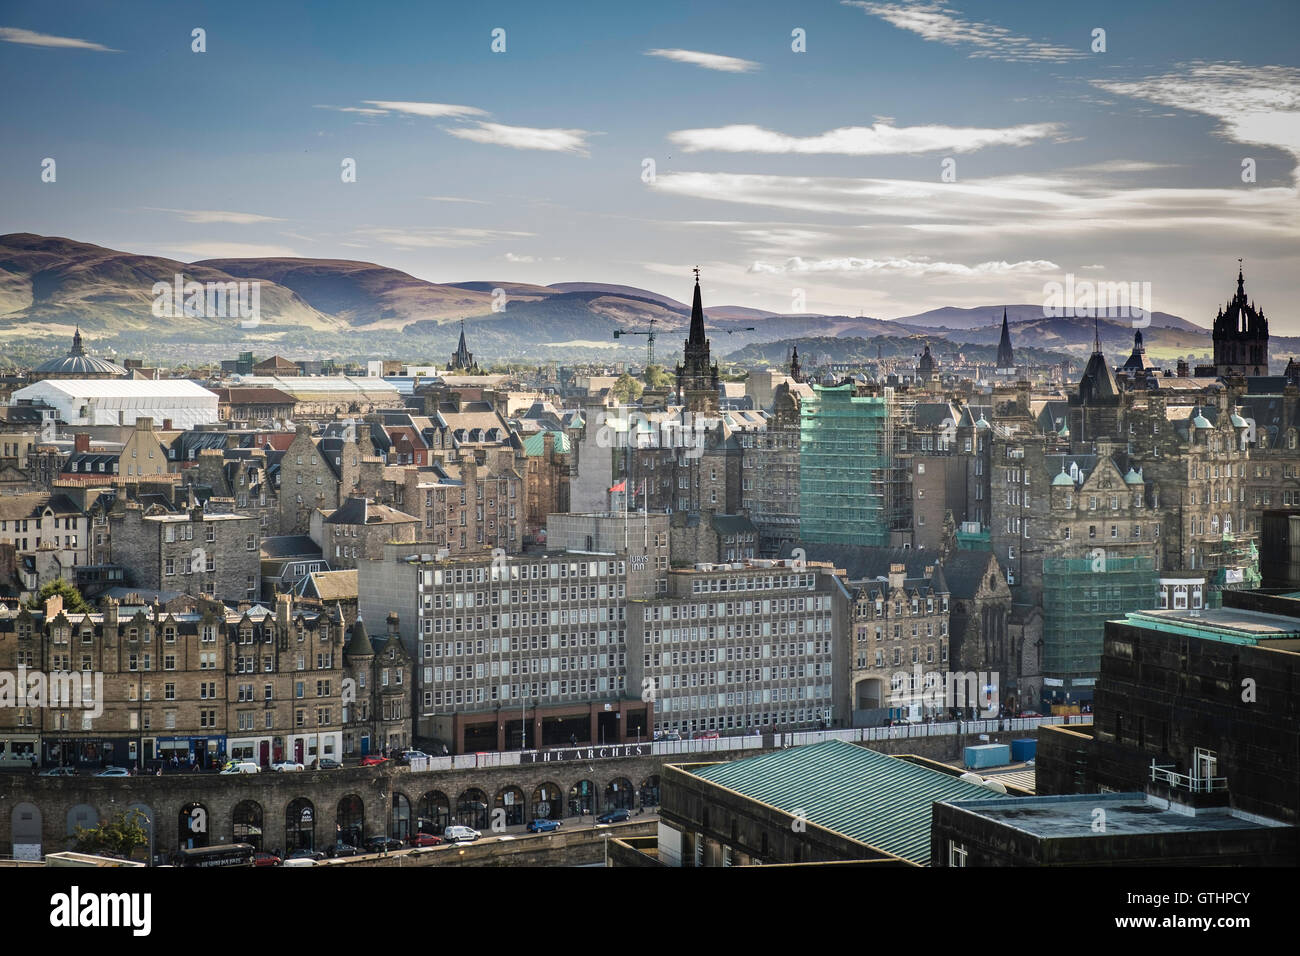 View of the Old Town out to the suburbs of Bruntsfield, Marchmont, Newington and the Pentland Hills, Edinburgh, Scotland Stock Photo